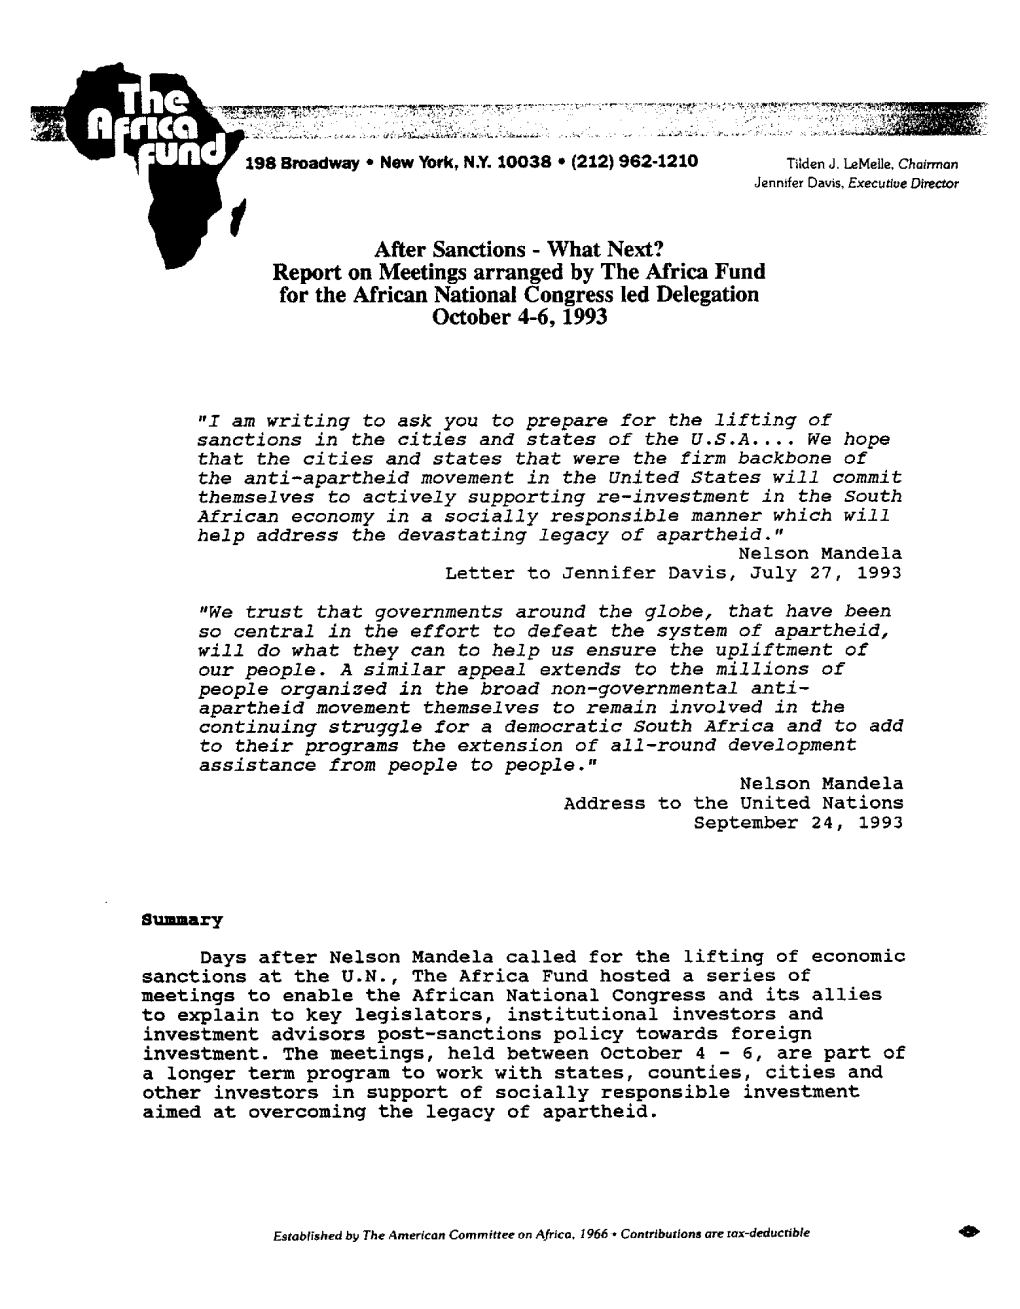 After Sanctions - What Next? Report on Meetings Arranged by the Africa Fund for the African National Congress Led Delegation October 4-6, 1993